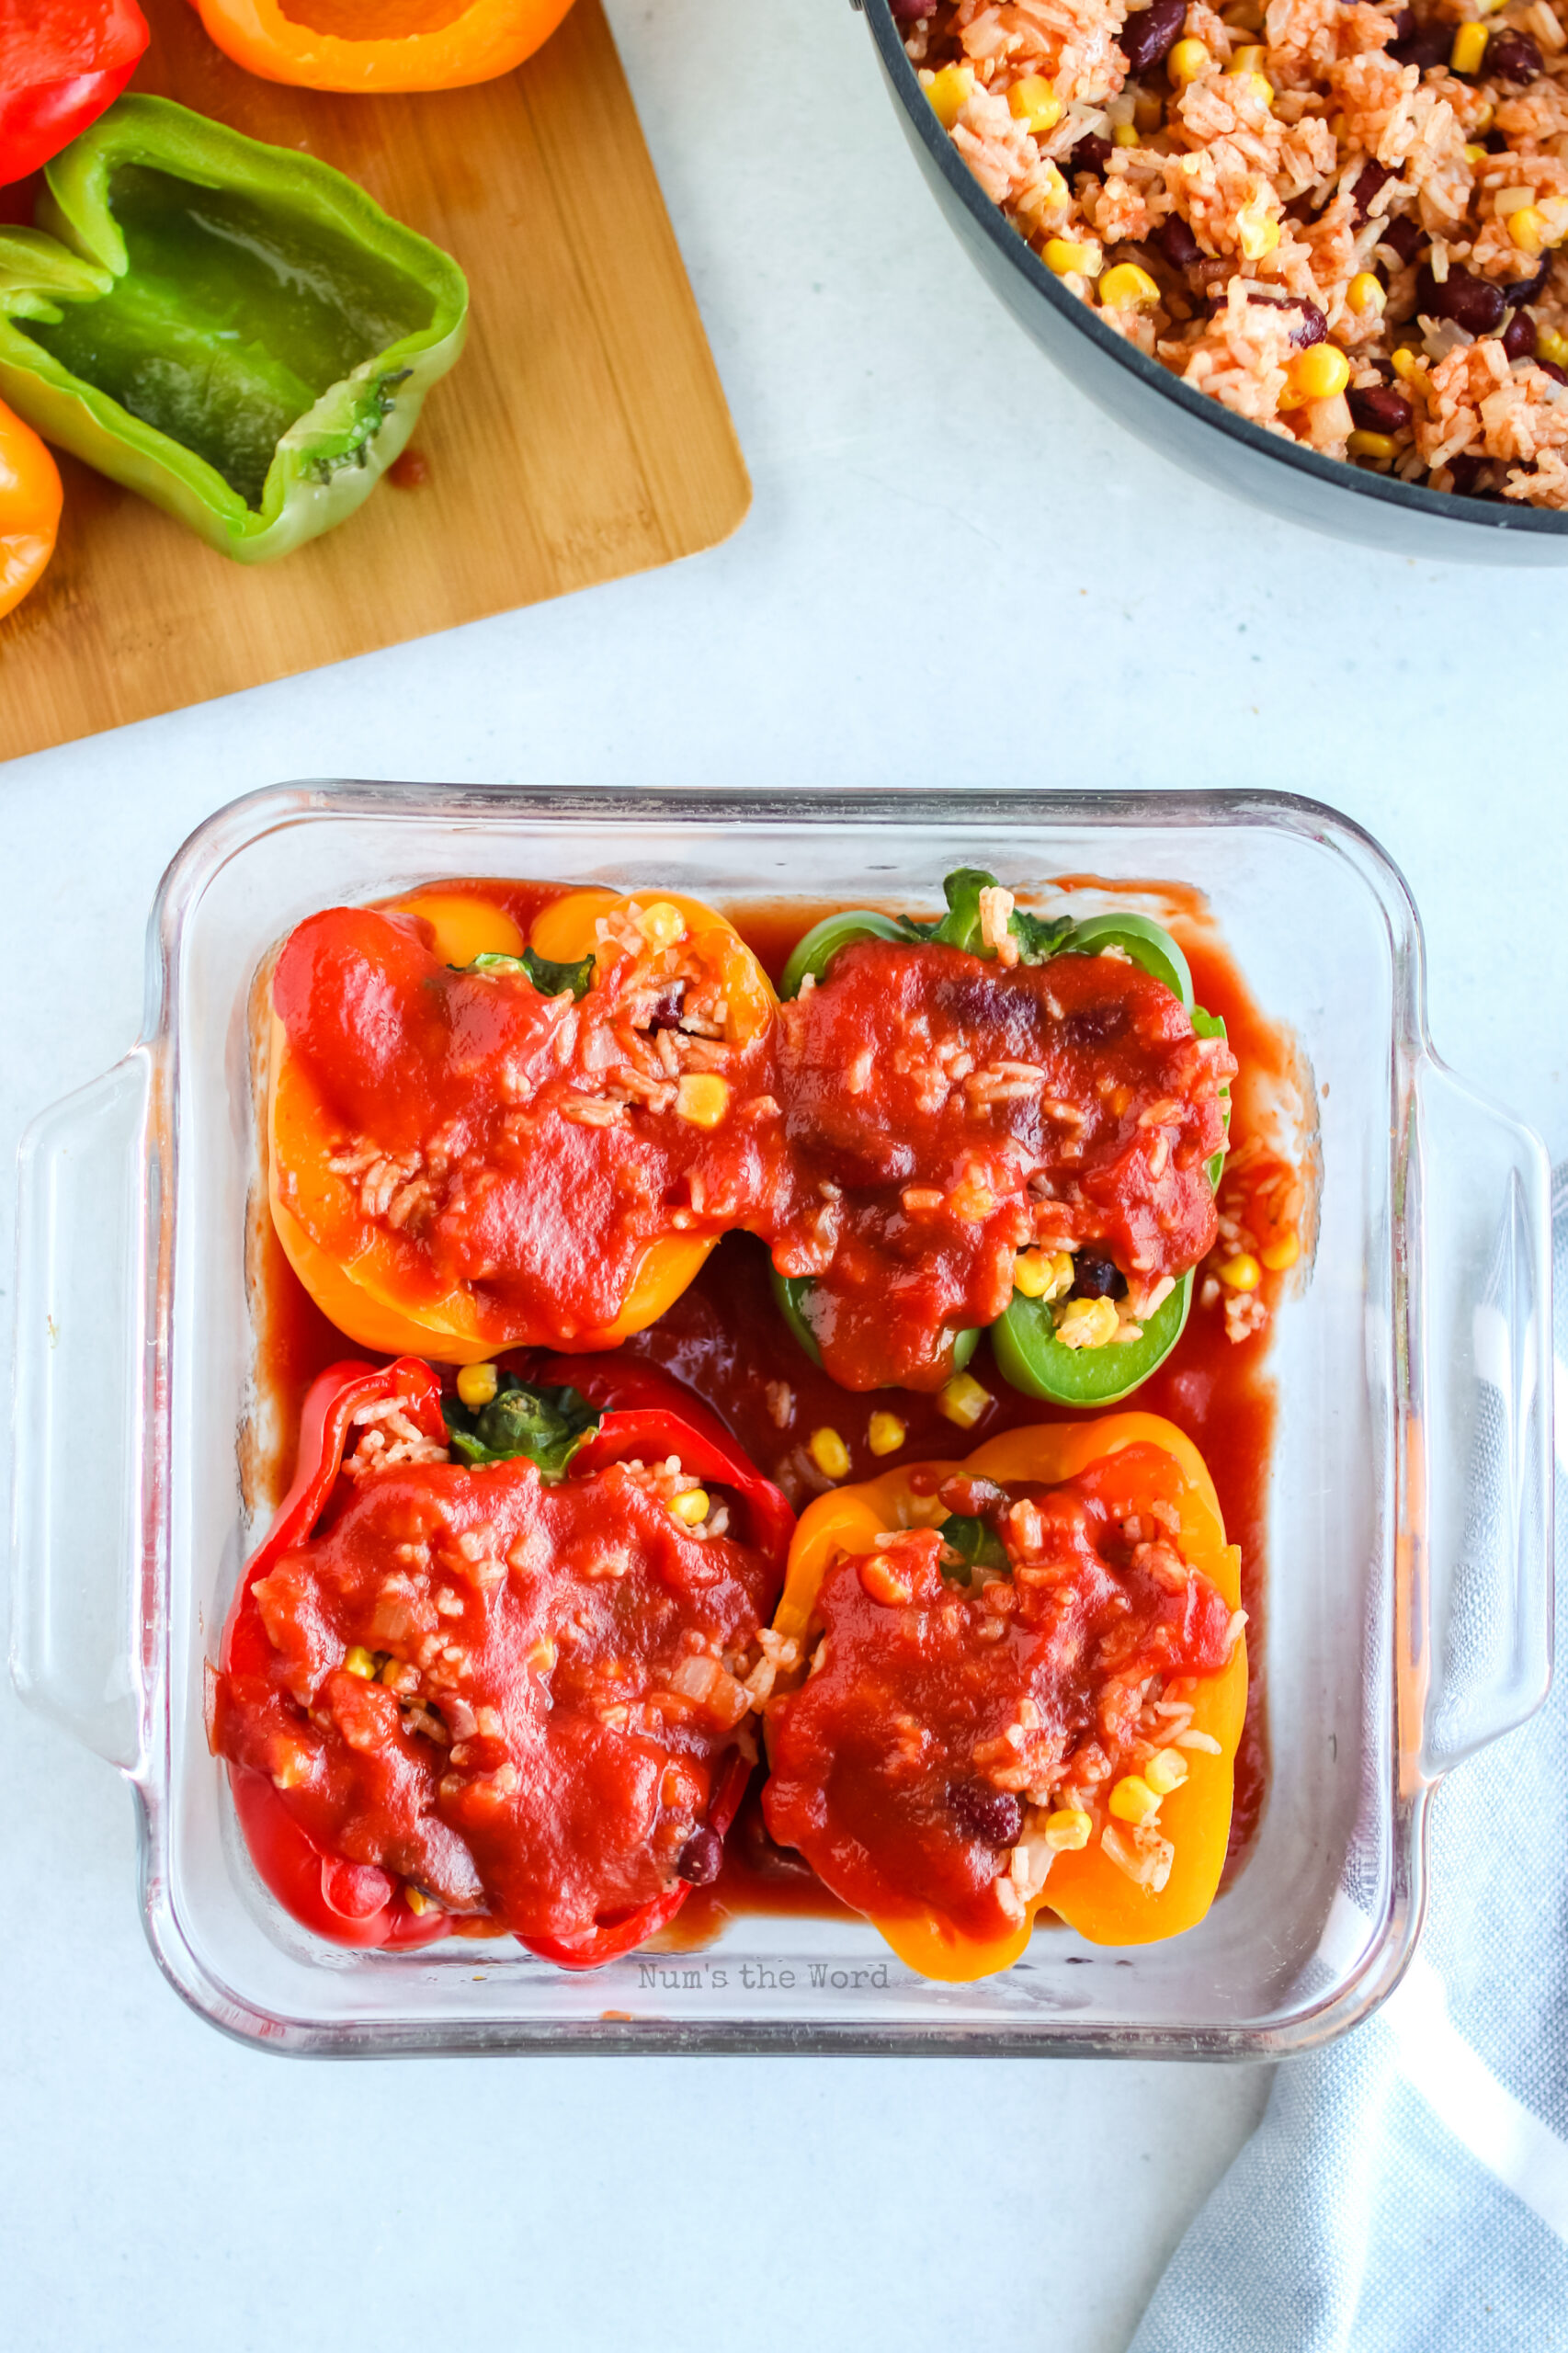 tomato sauce poured over filled peppers.